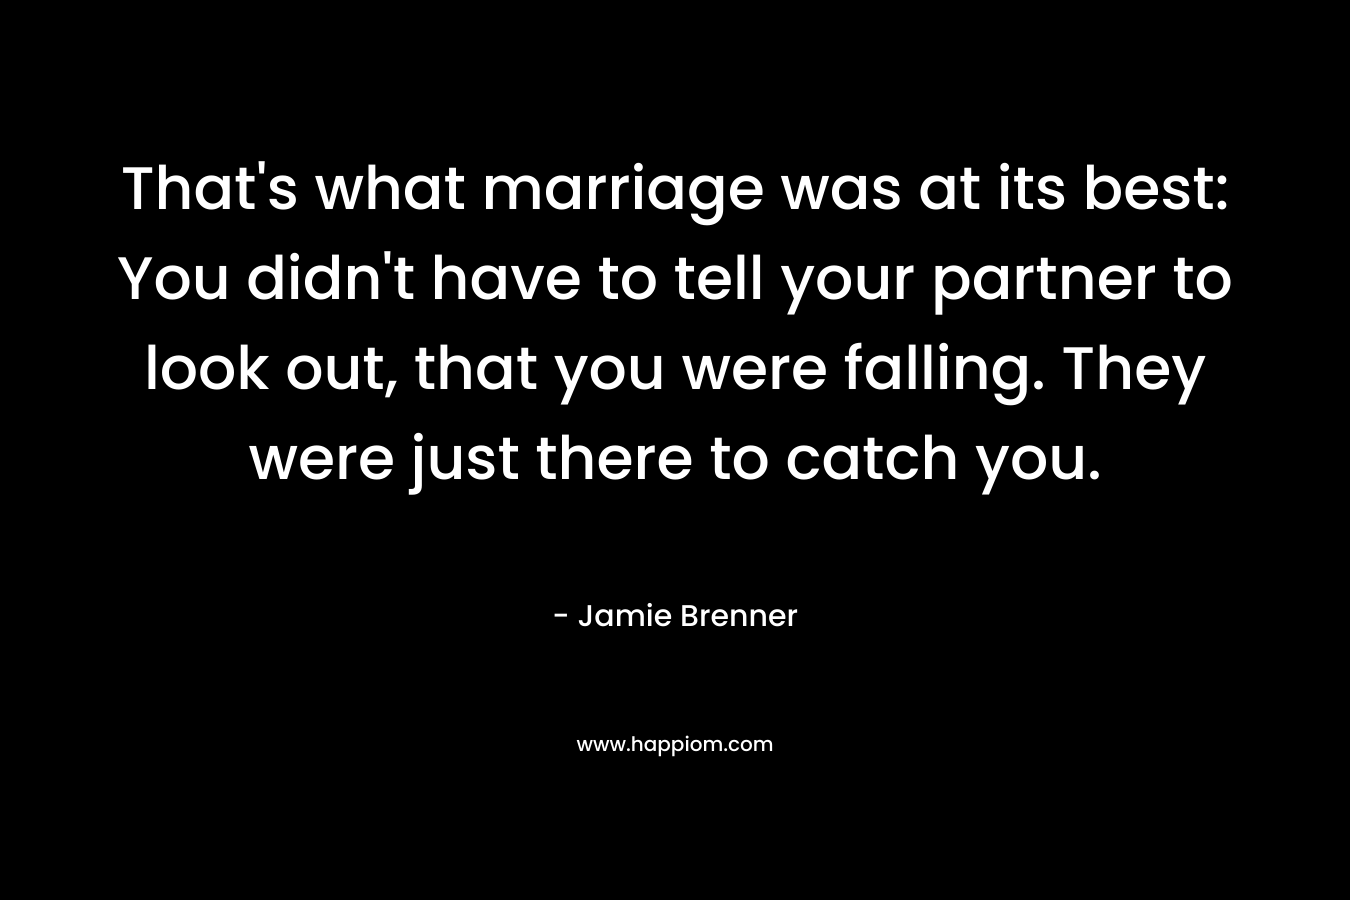 That’s what marriage was at its best: You didn’t have to tell your partner to look out, that you were falling. They were just there to catch you. – Jamie Brenner